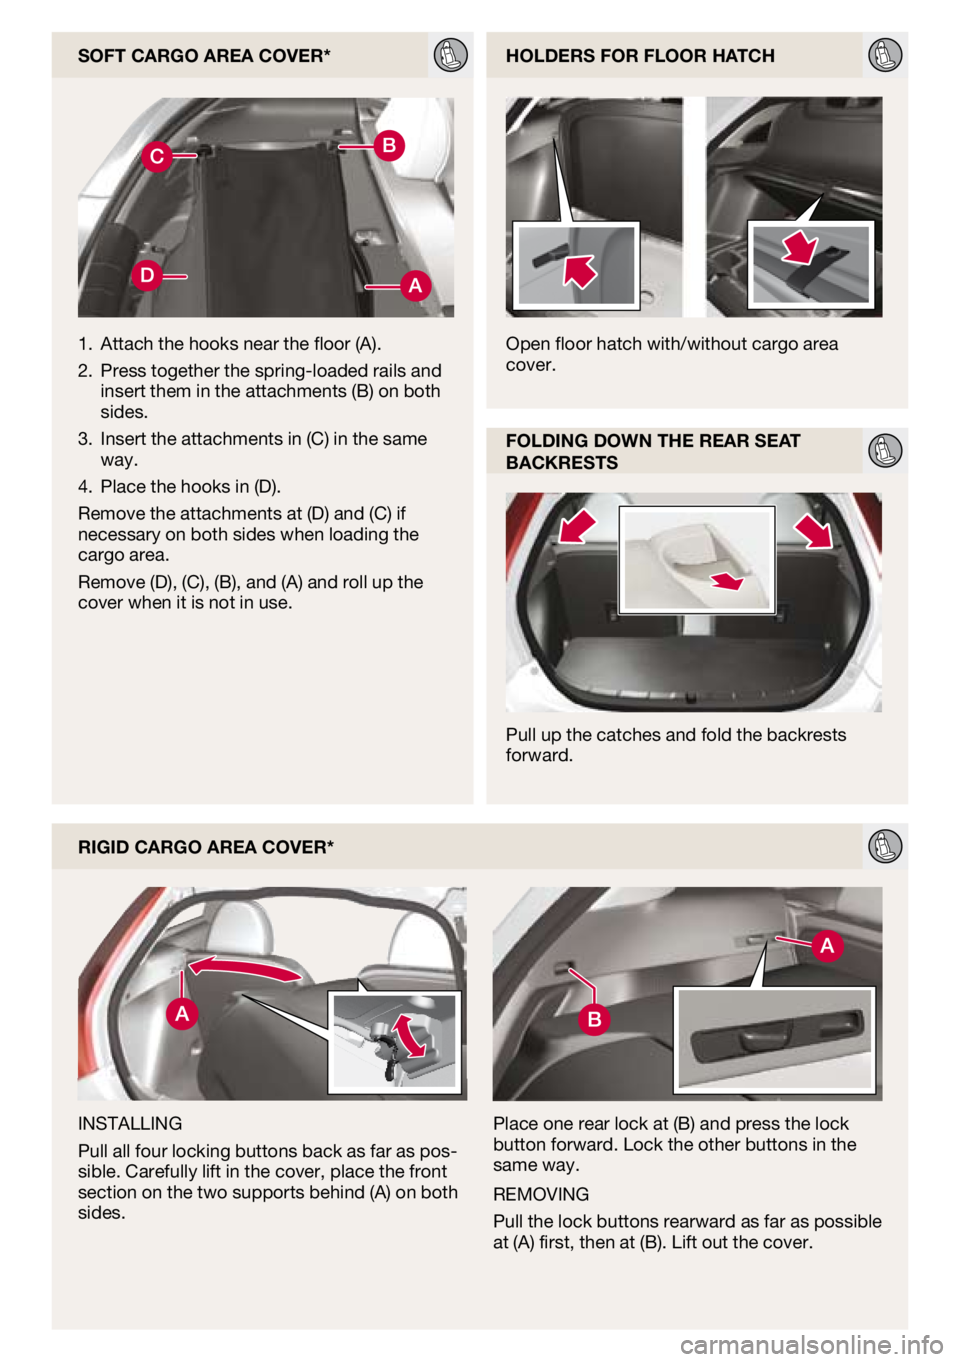 VOLVO C30 2010  Quick Guide 
SoFt cargo area cover*
rigid cargo area cover*
iNSTalliNg
Pull all four locking buttons back as far as pos-sible. Carefully lift in the cover, place the front 
section on the two supports behind (a) 